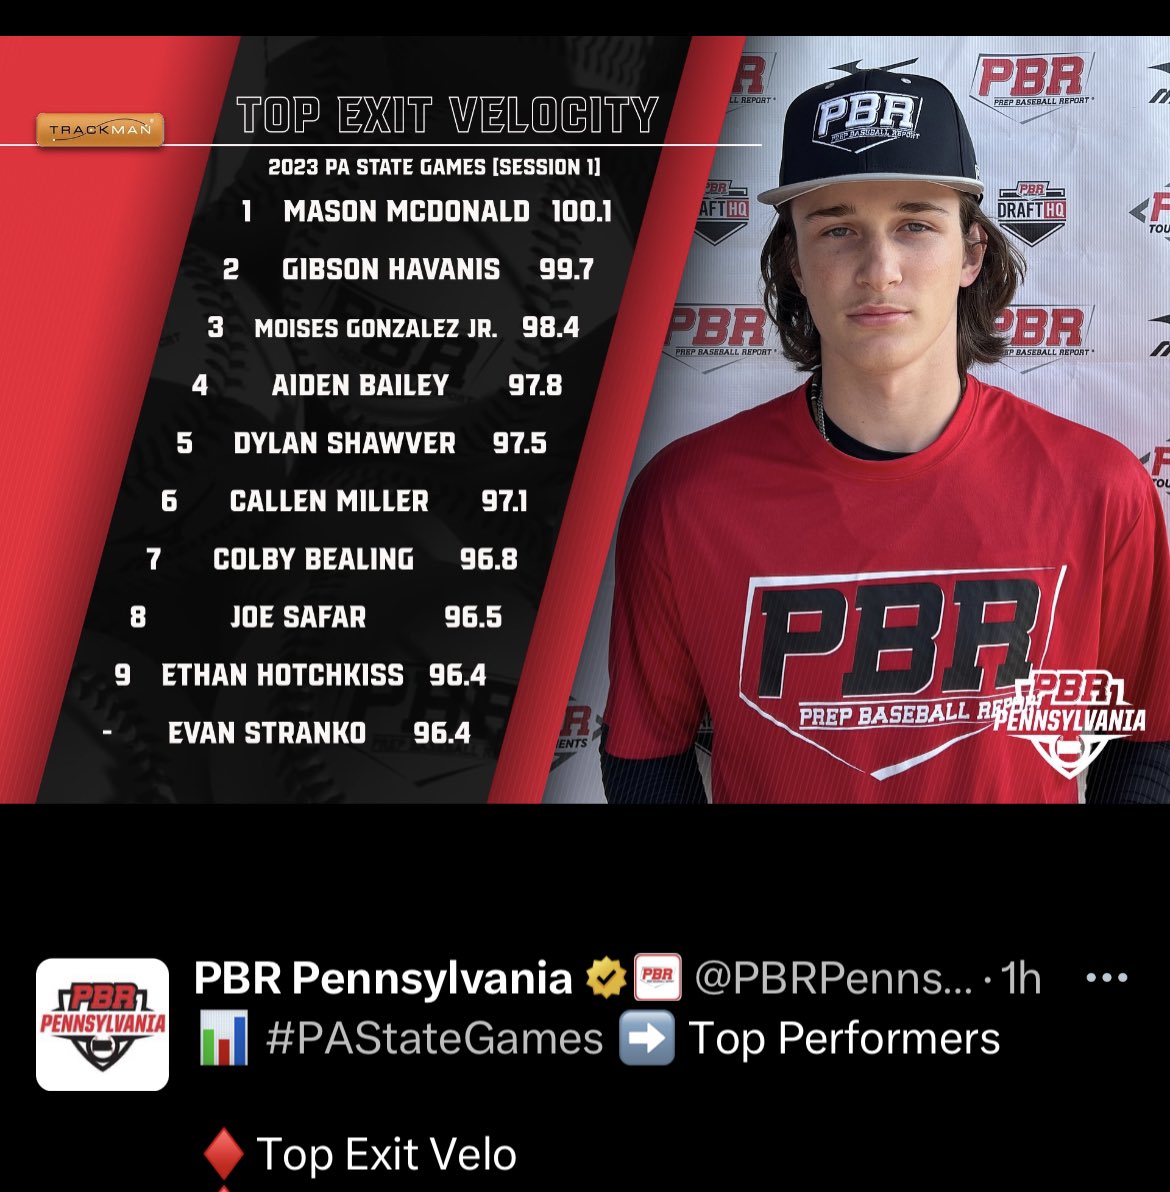 Thanks to @PBRPennsylvania for a great event. @elite_national2 @UHS__Baseball @BUncommitted